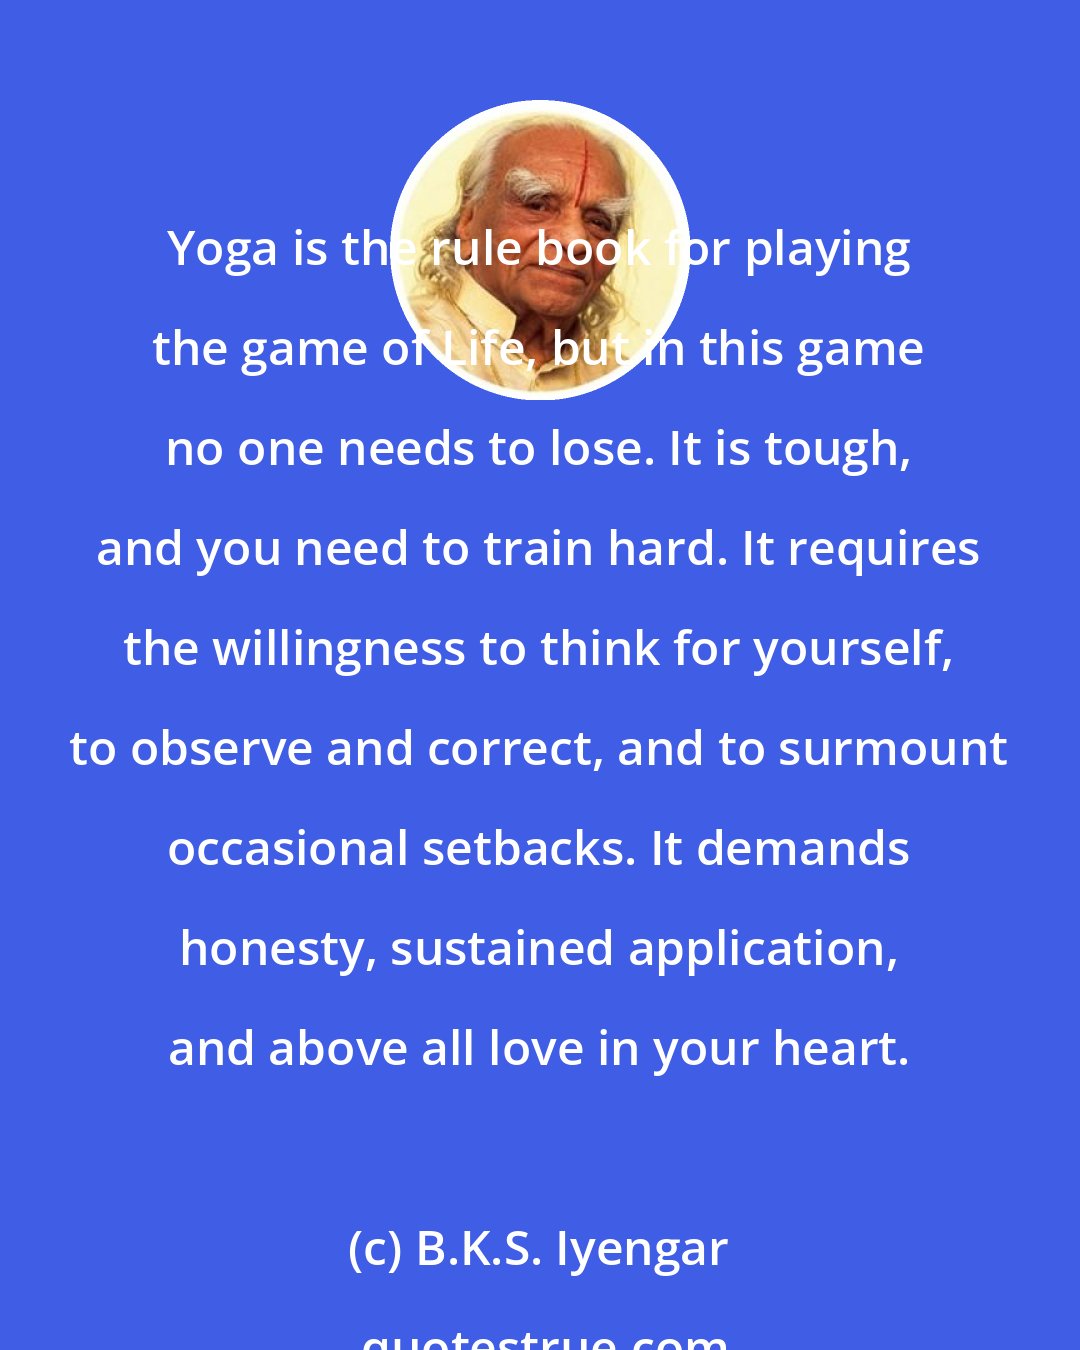 B.K.S. Iyengar: Yoga is the rule book for playing the game of Life, but in this game no one needs to lose. It is tough, and you need to train hard. It requires the willingness to think for yourself, to observe and correct, and to surmount occasional setbacks. It demands honesty, sustained application, and above all love in your heart.